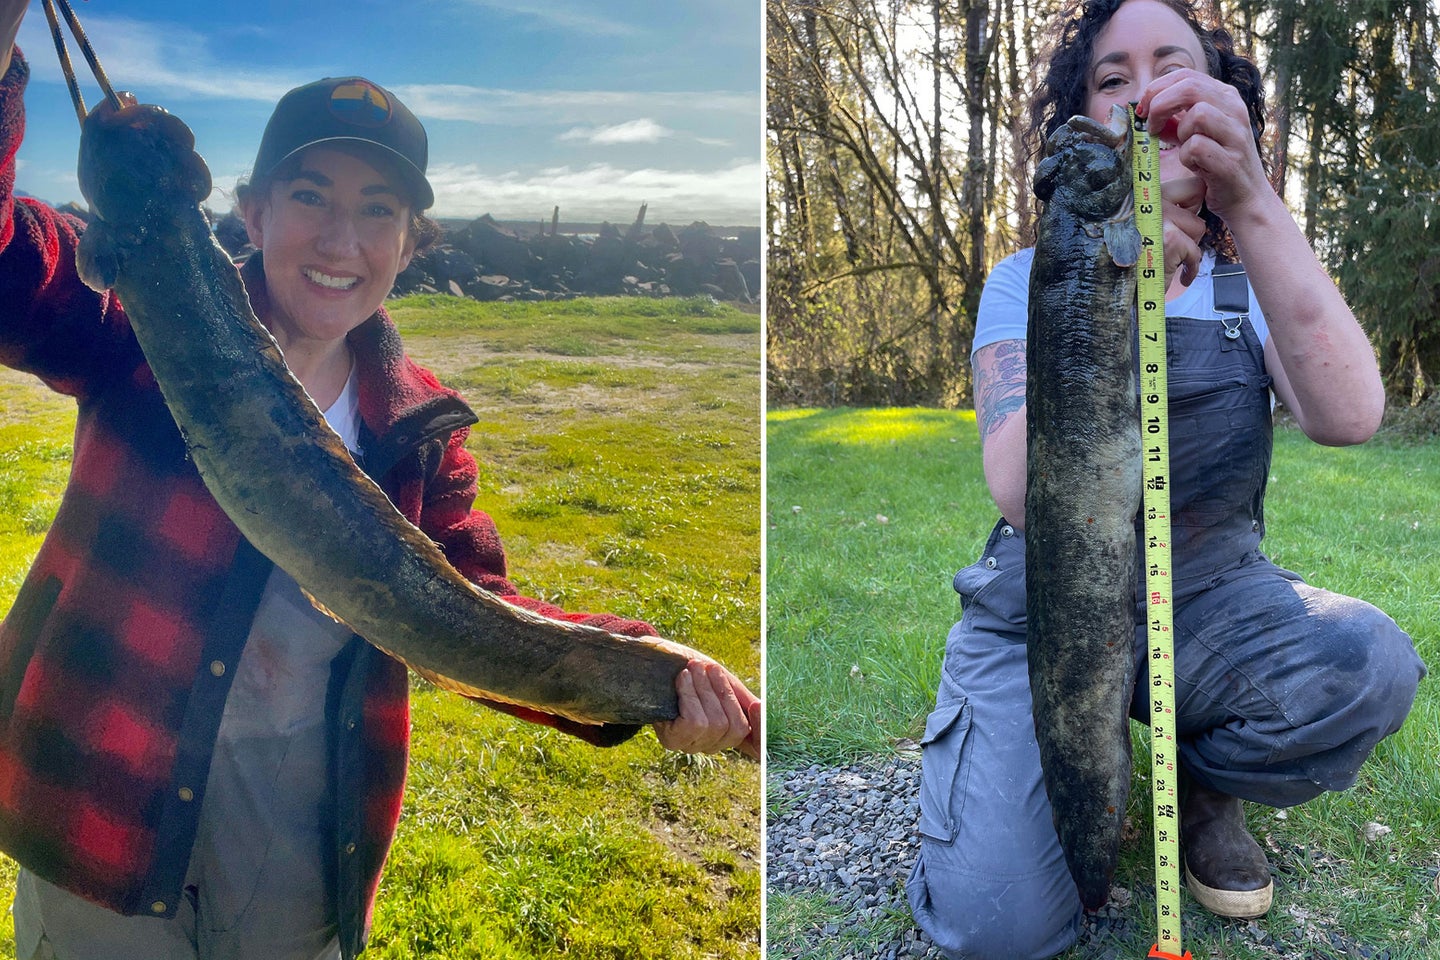 An Oregon angler poses with a world-record monkeyface prickleback.